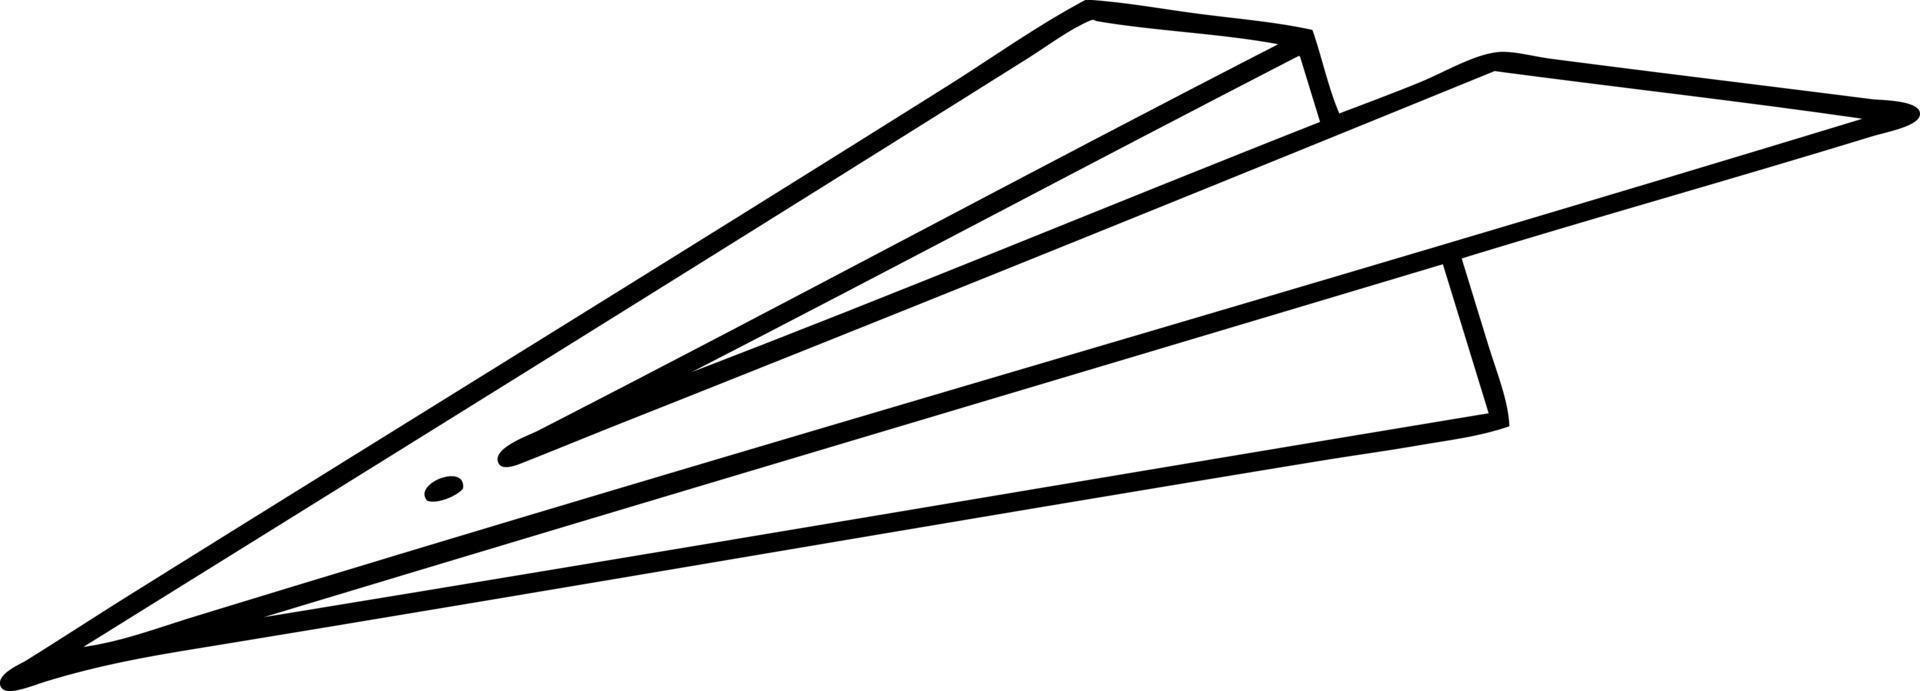 tattoo in black line style of a paper airplane vector